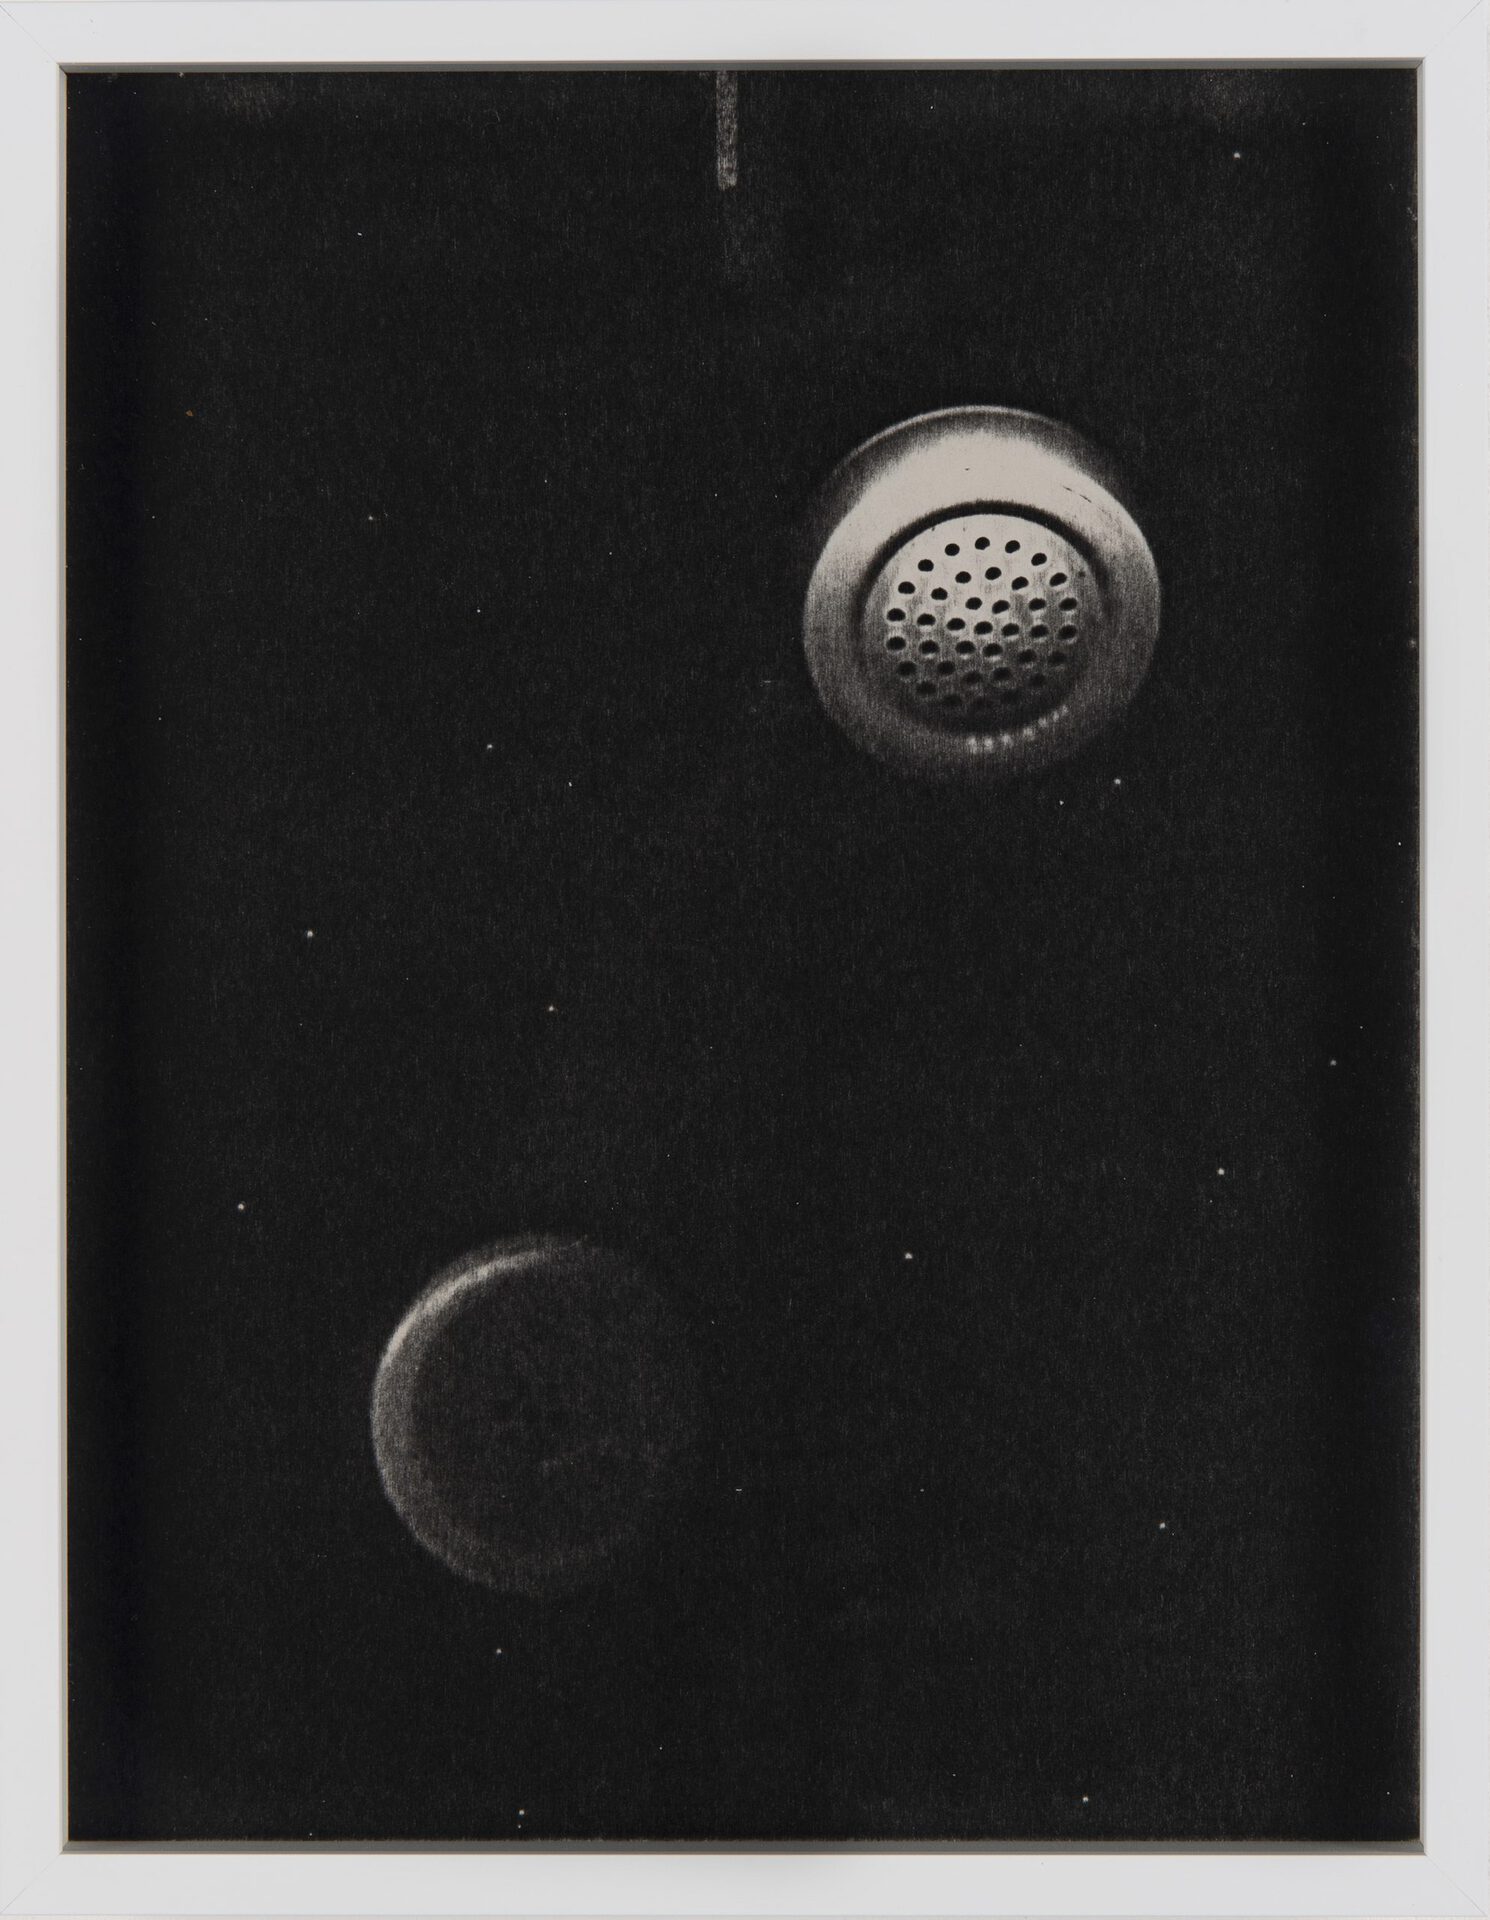 Pati Hill, Untitled (telephone), c.1977-79, serie (Common Objects), photocopy, 28 x 21,5 cm